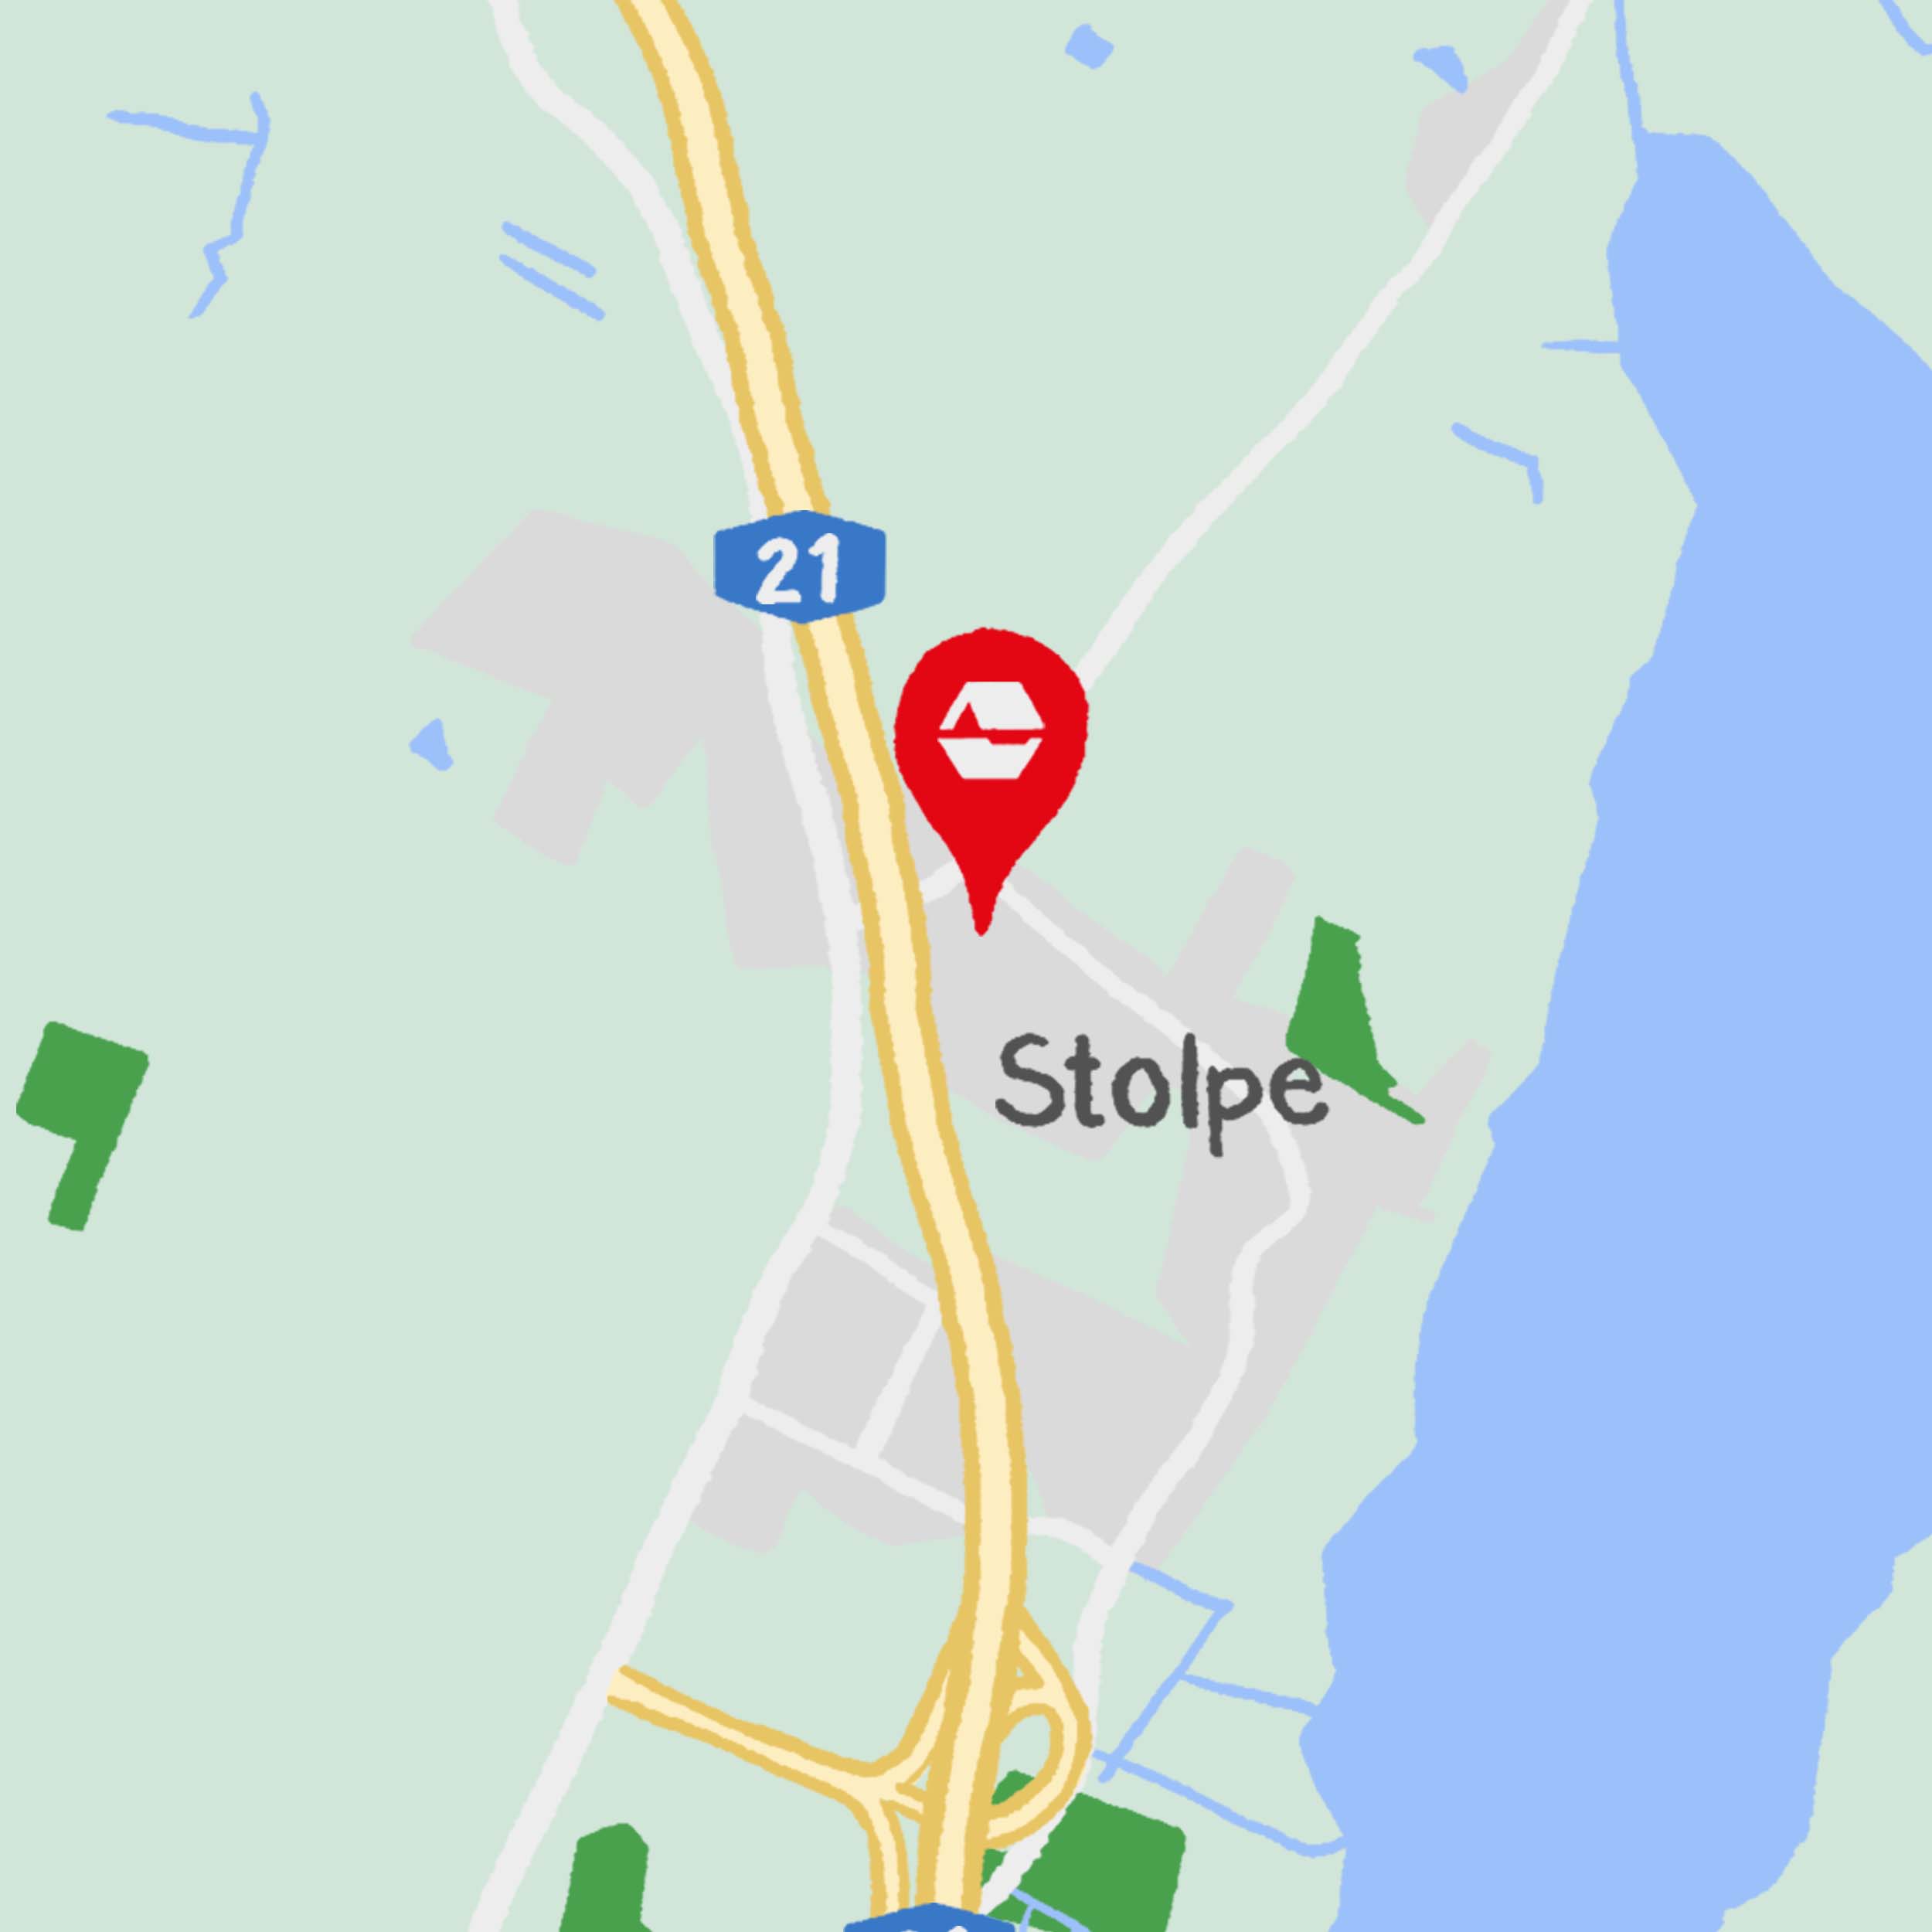 Stolpe